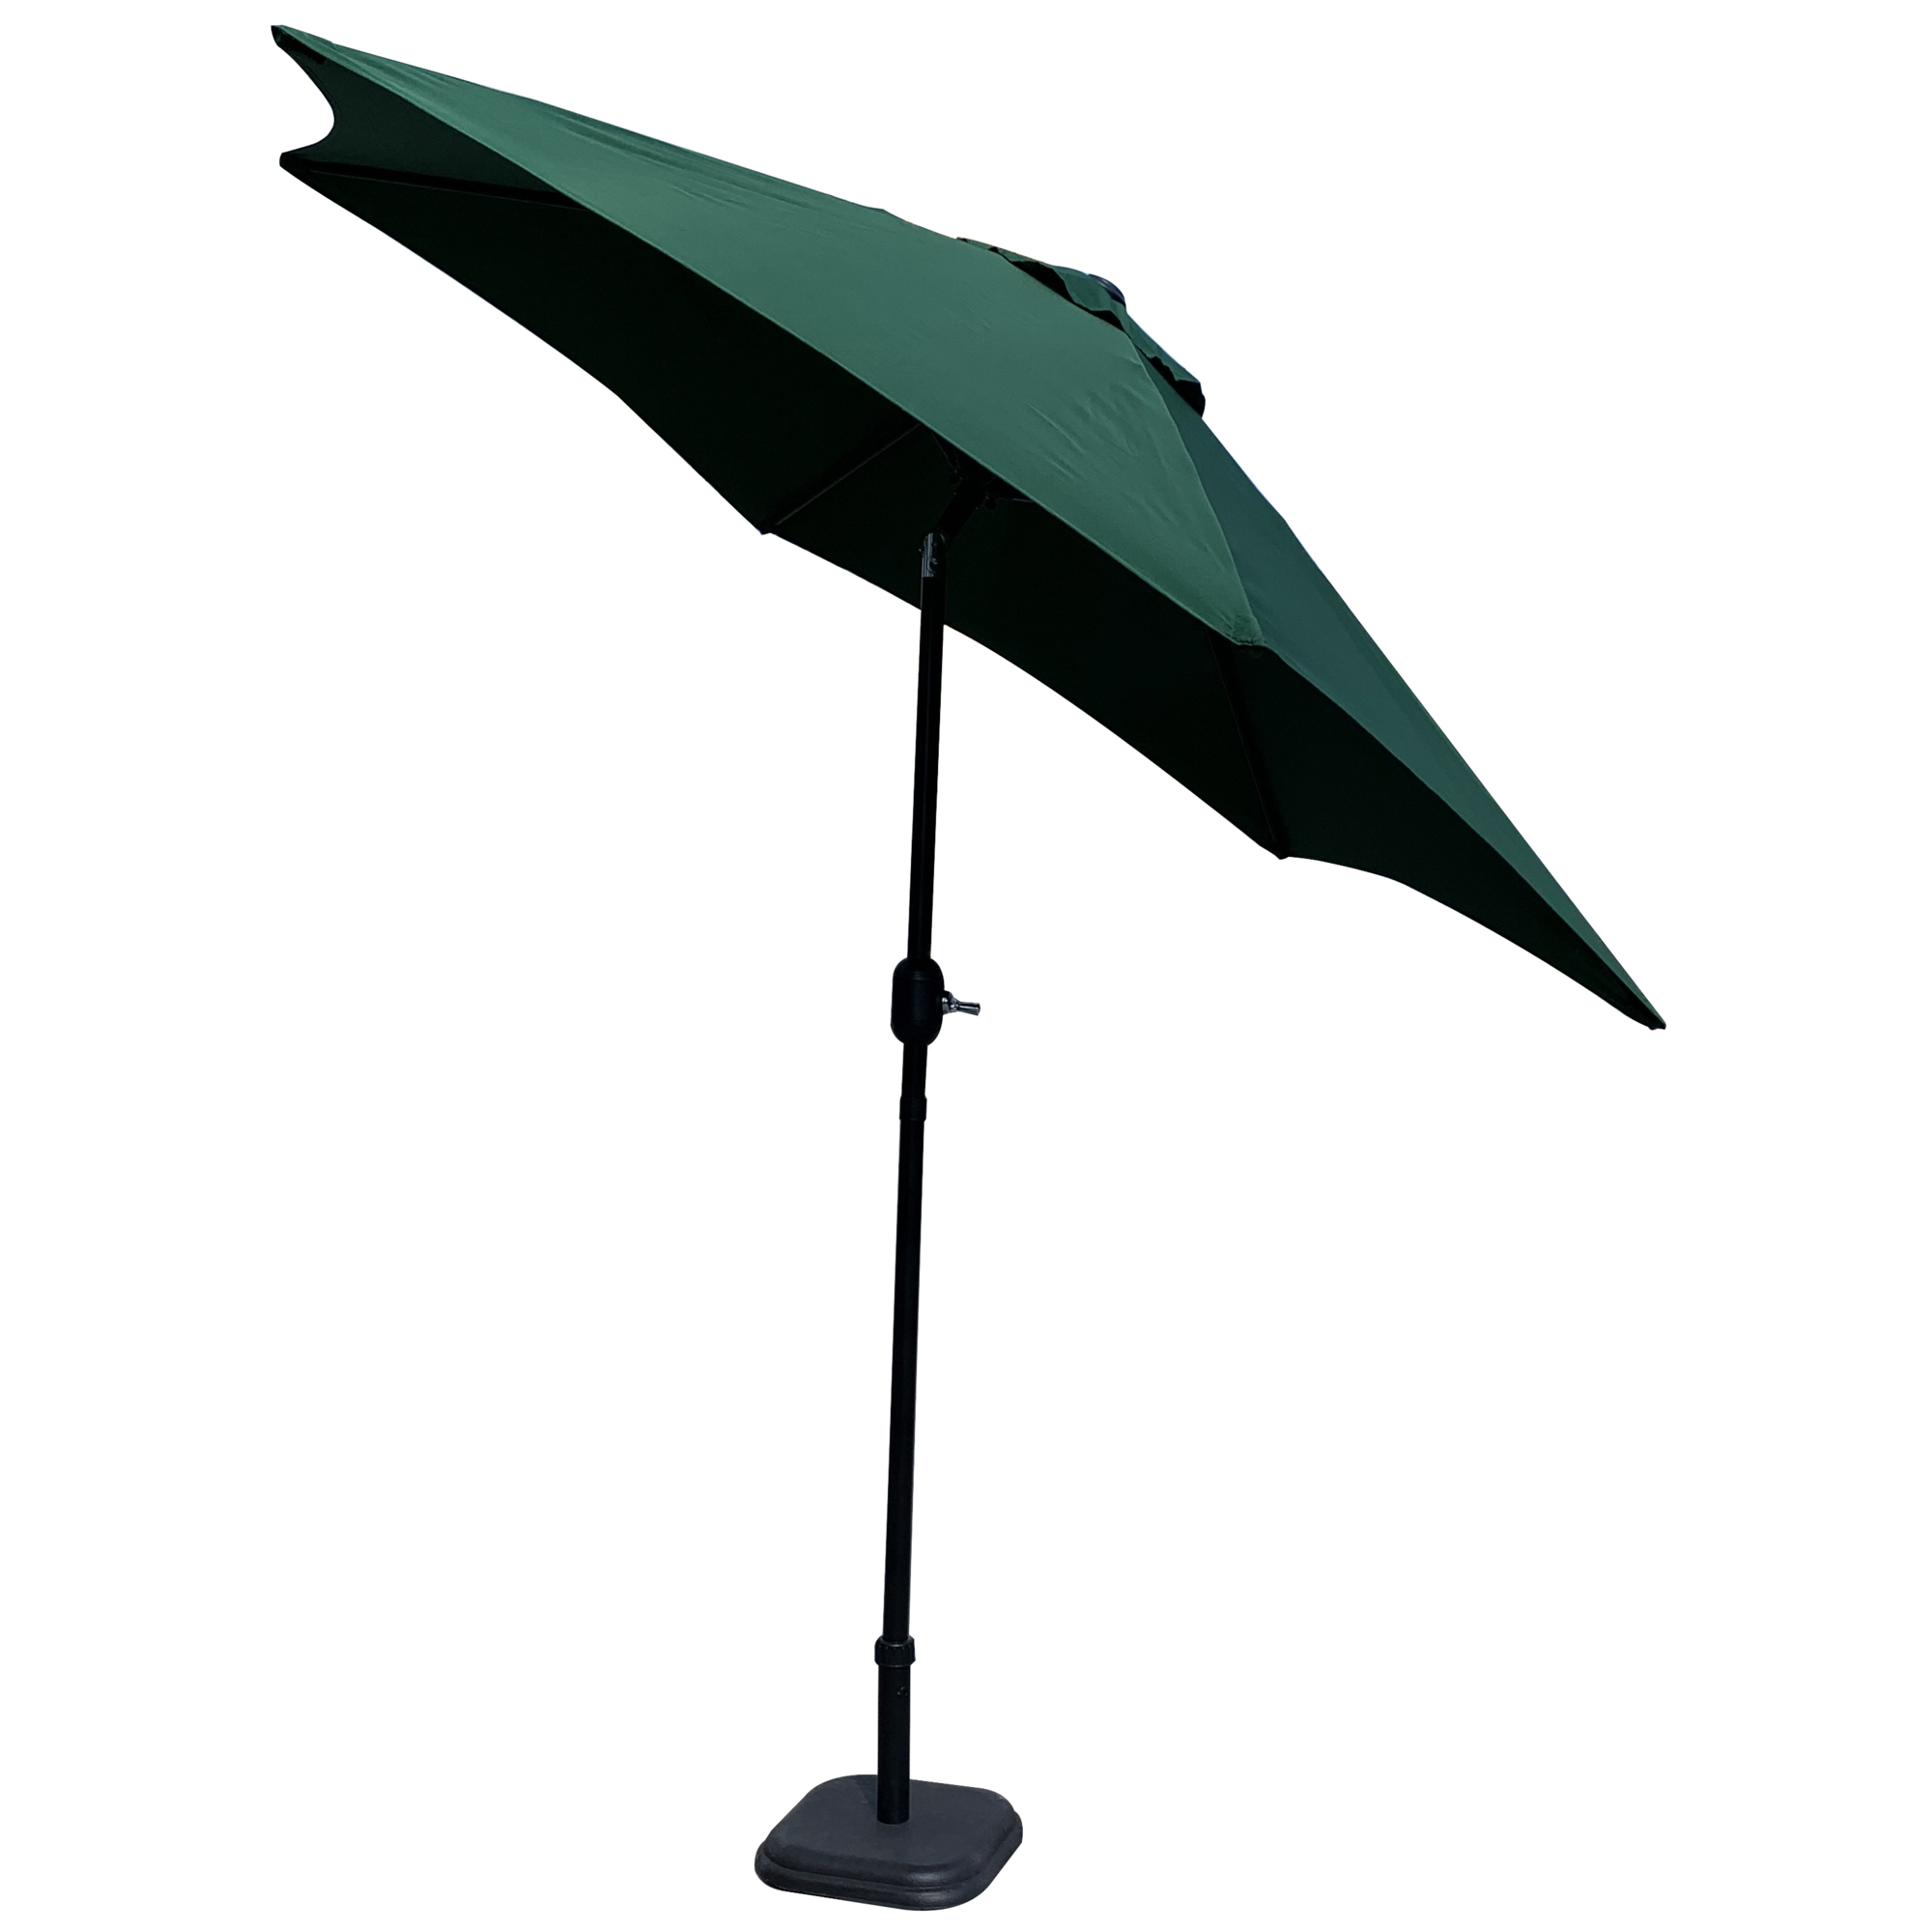 Leigh Country, Patio Umbrella Green 9ft., Canopy Diameter 9 ft, Shape Round, Model TX 94122